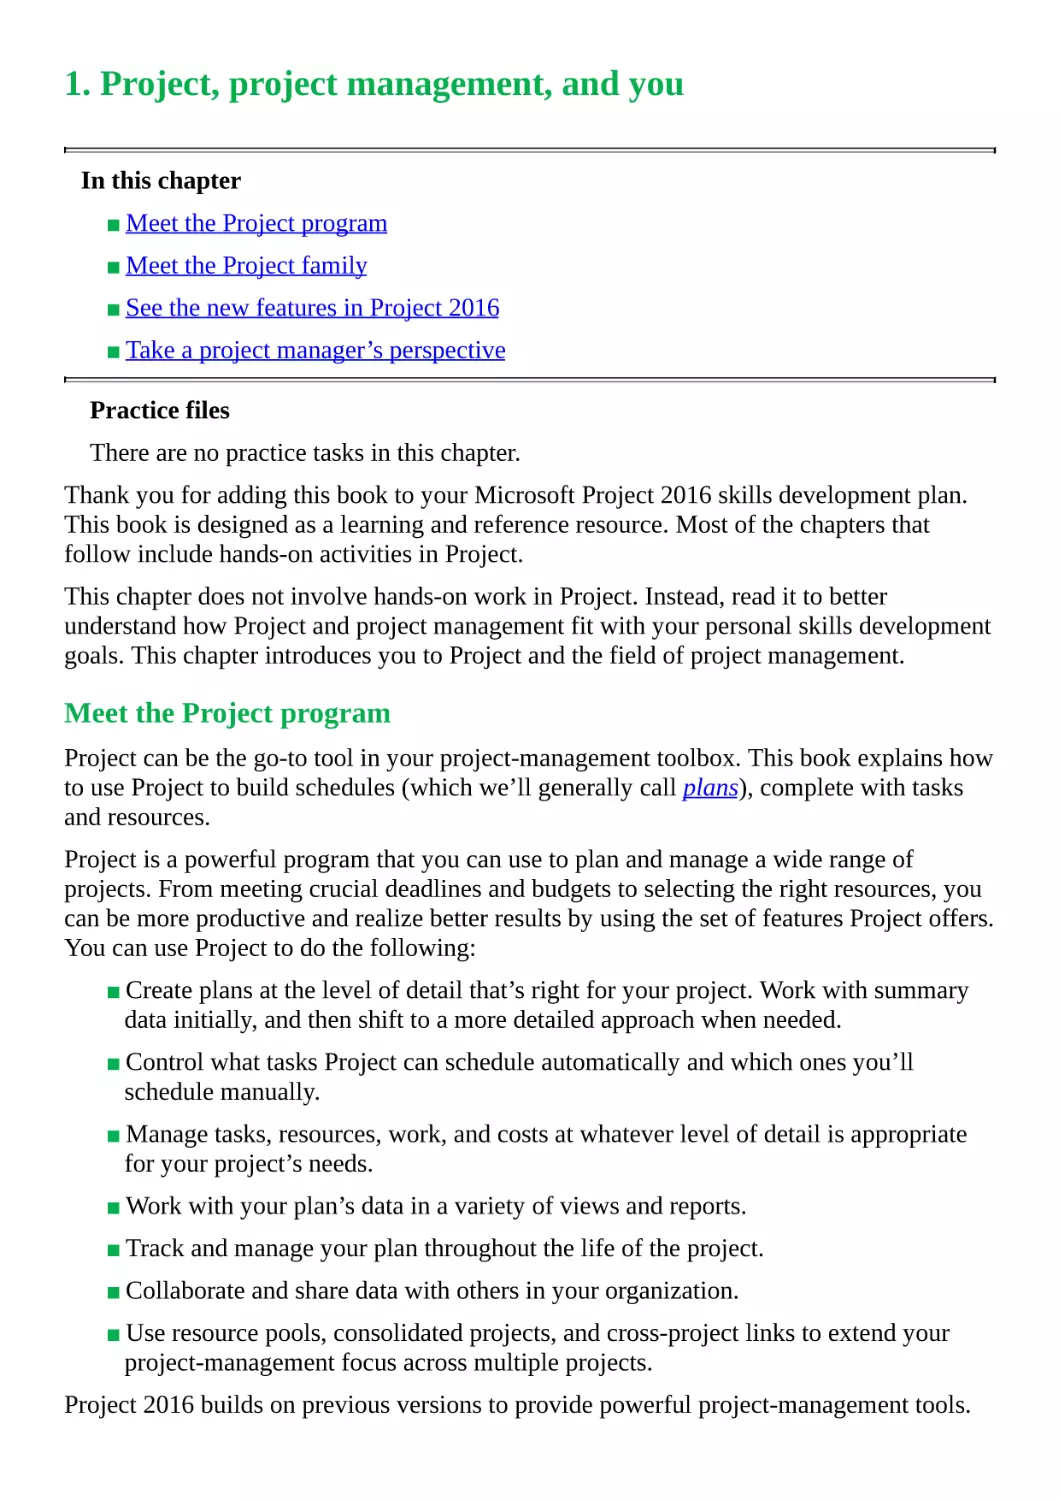 1. Project, project management, and you
Meet the Project program